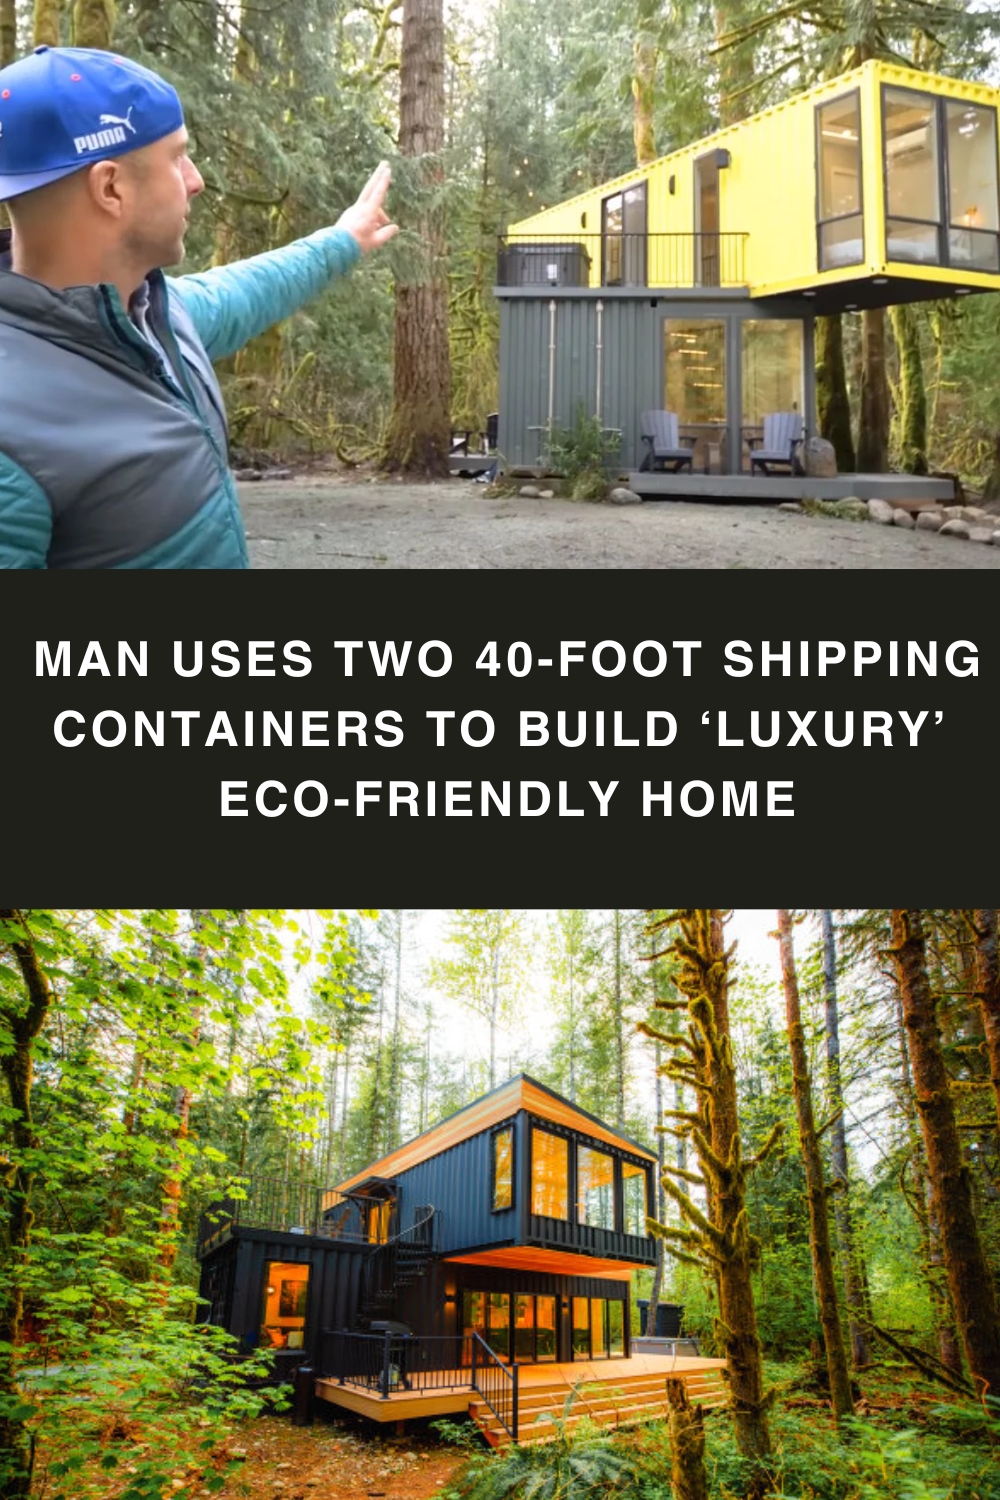 Man uses two 40-foot shipping containers to build ‘luxury’ eco-friendly home pin